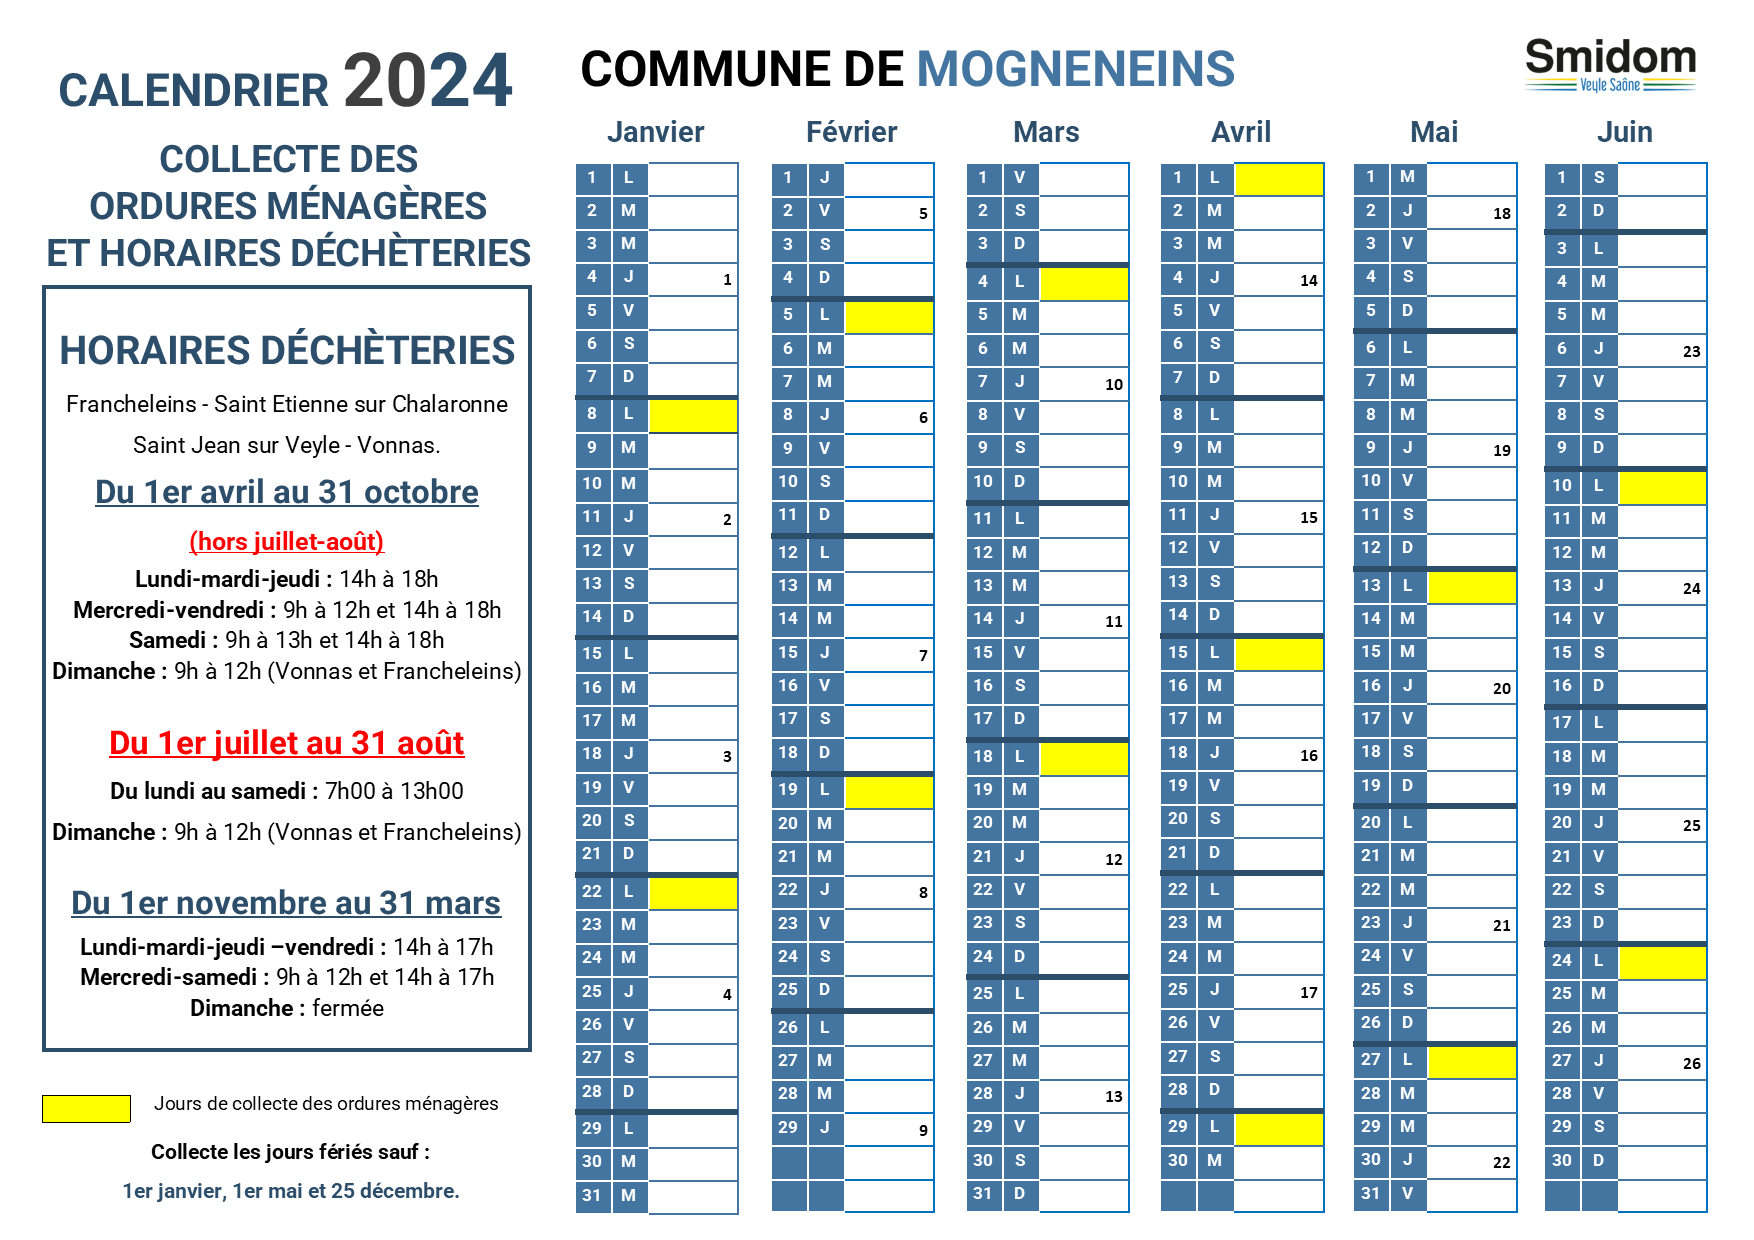 MOGNENEINS - Calendrier 2024.png